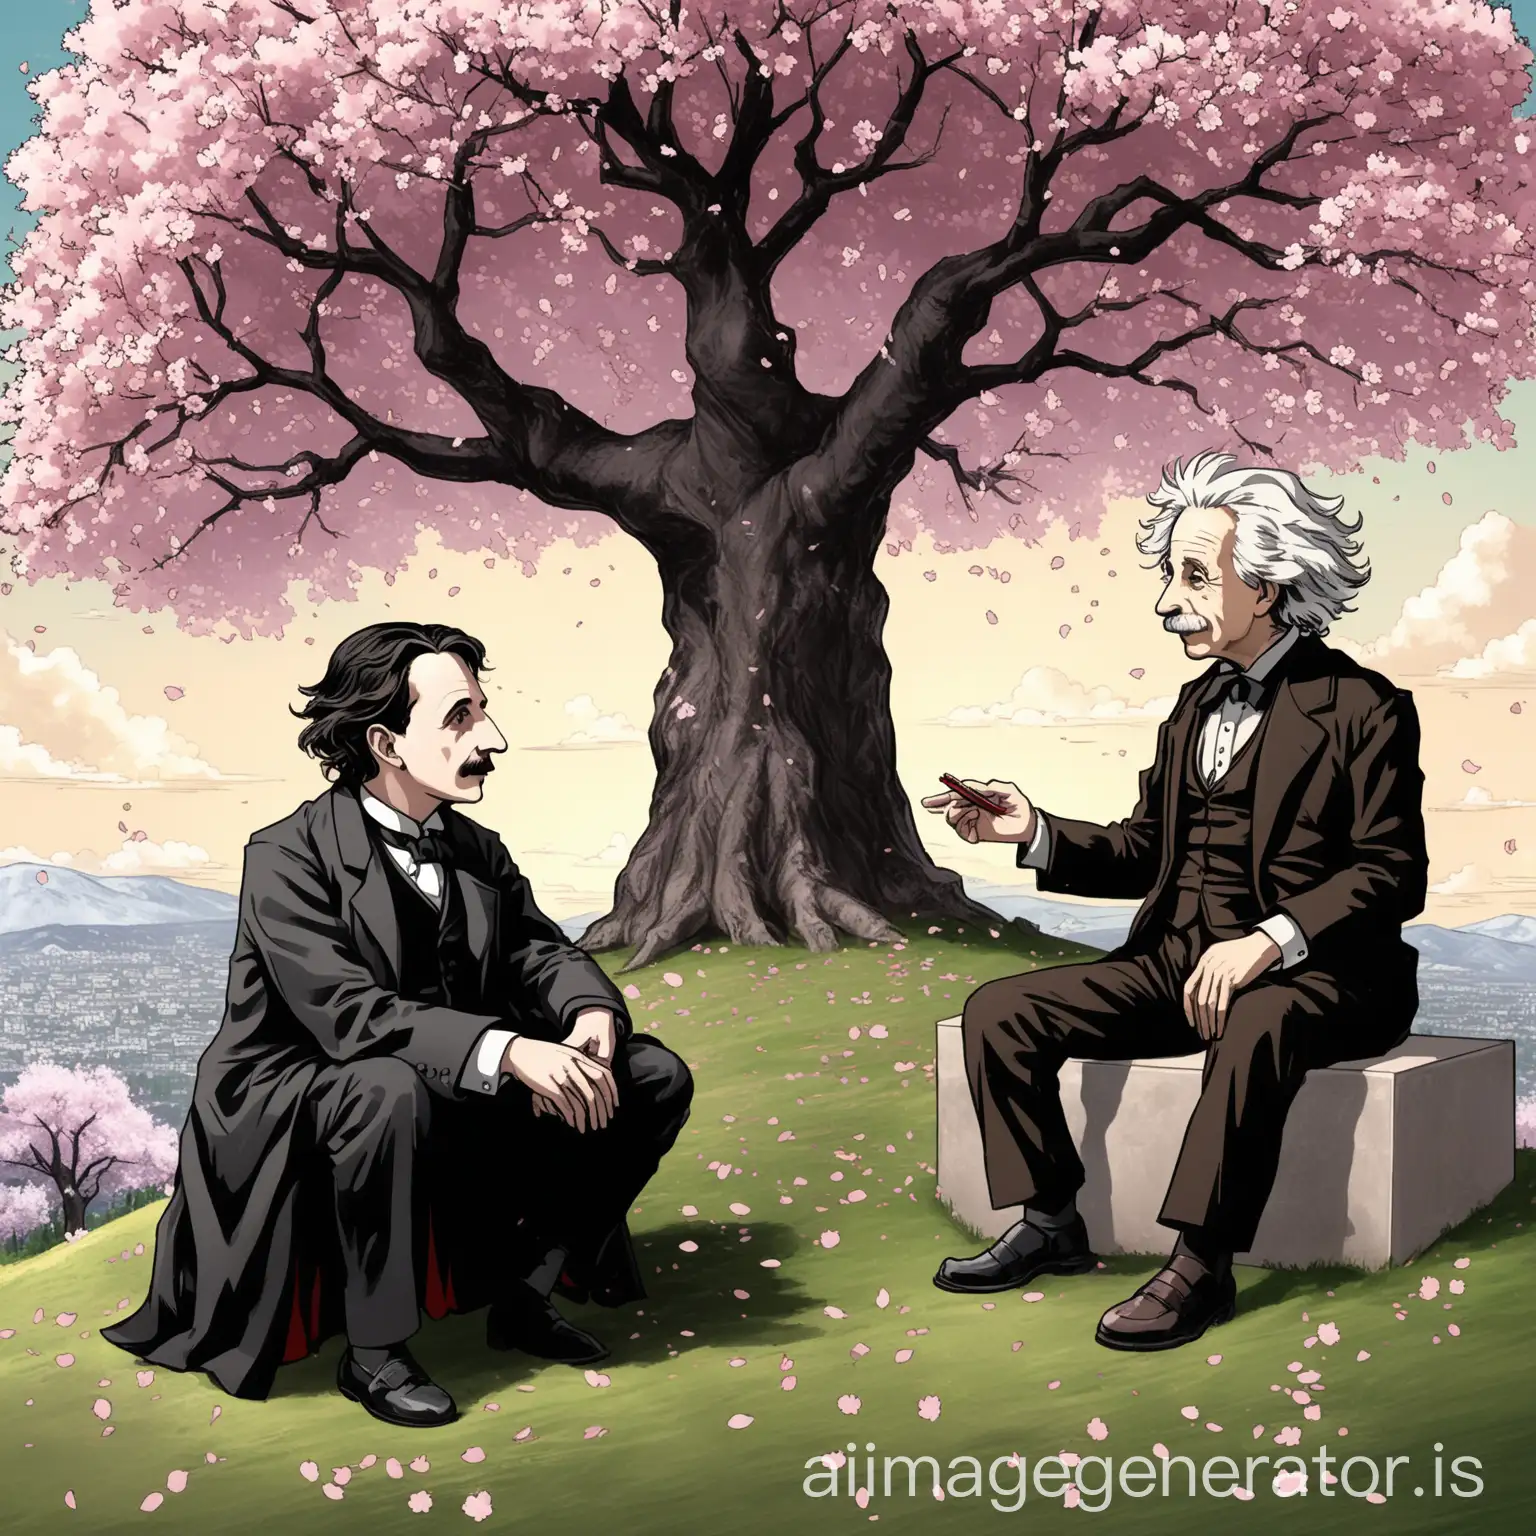 Nicola tesla and Albert Einstein discussing a math problem under a cherry blossom tree on top of a hill.